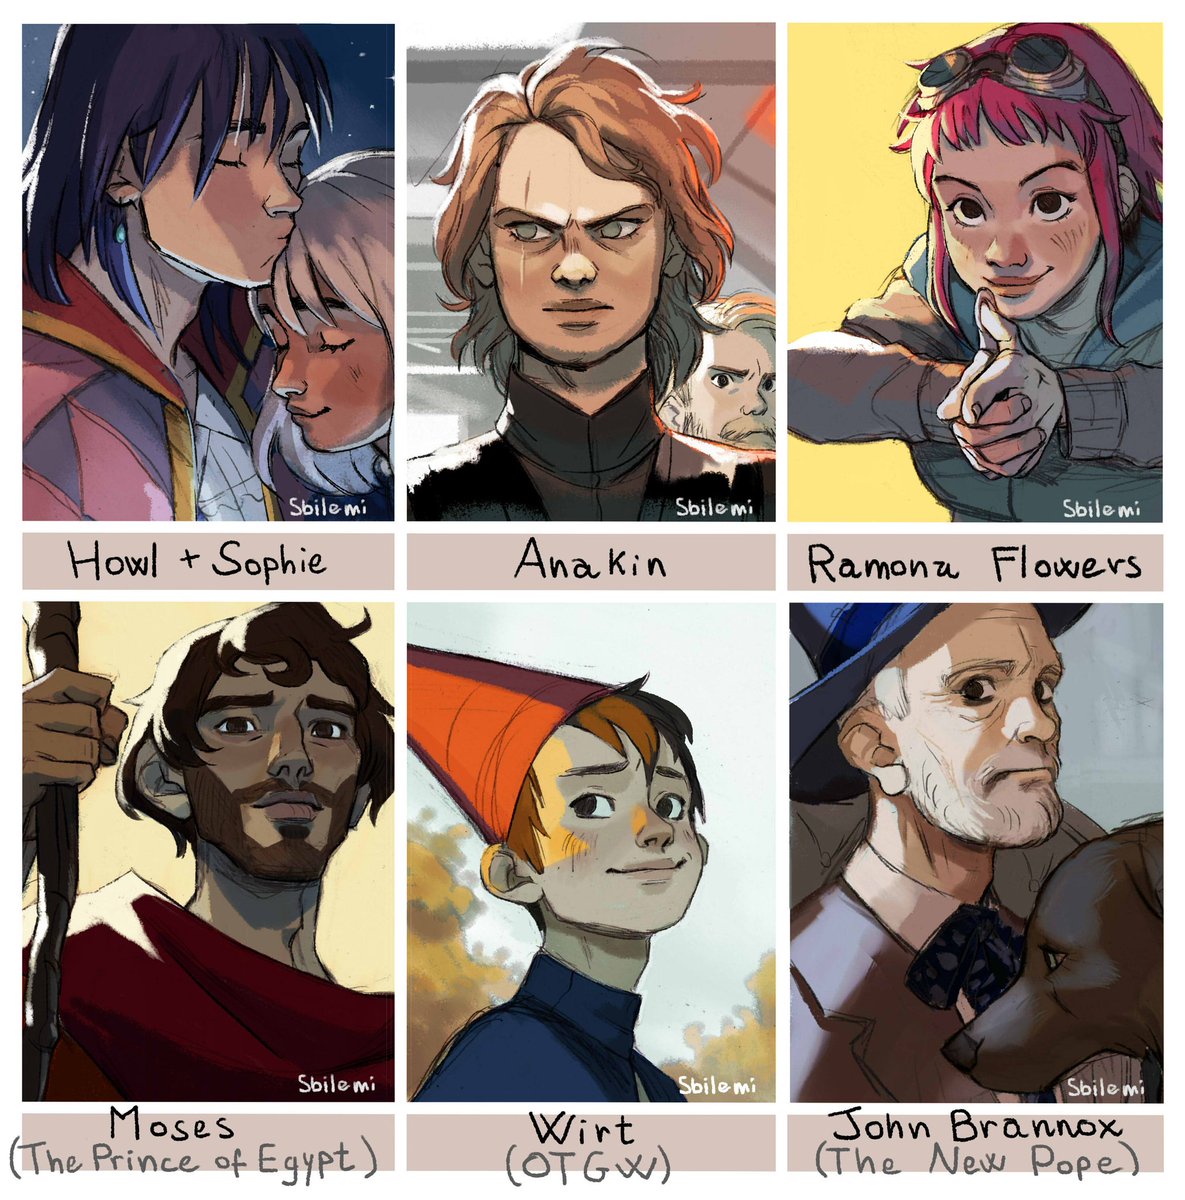 It's complete C:
Thanks a lot to those who suggested the characters on ig, it was hard to do a selection 💔
#sixfanarts ~ 
#sixfanartschallenge #howl #howlmovingcastle #anakinskywalker #ramonaflowers #theprinceofegypt #wirt #overthegardenwall #otgw #johnbrannox #thenewpope